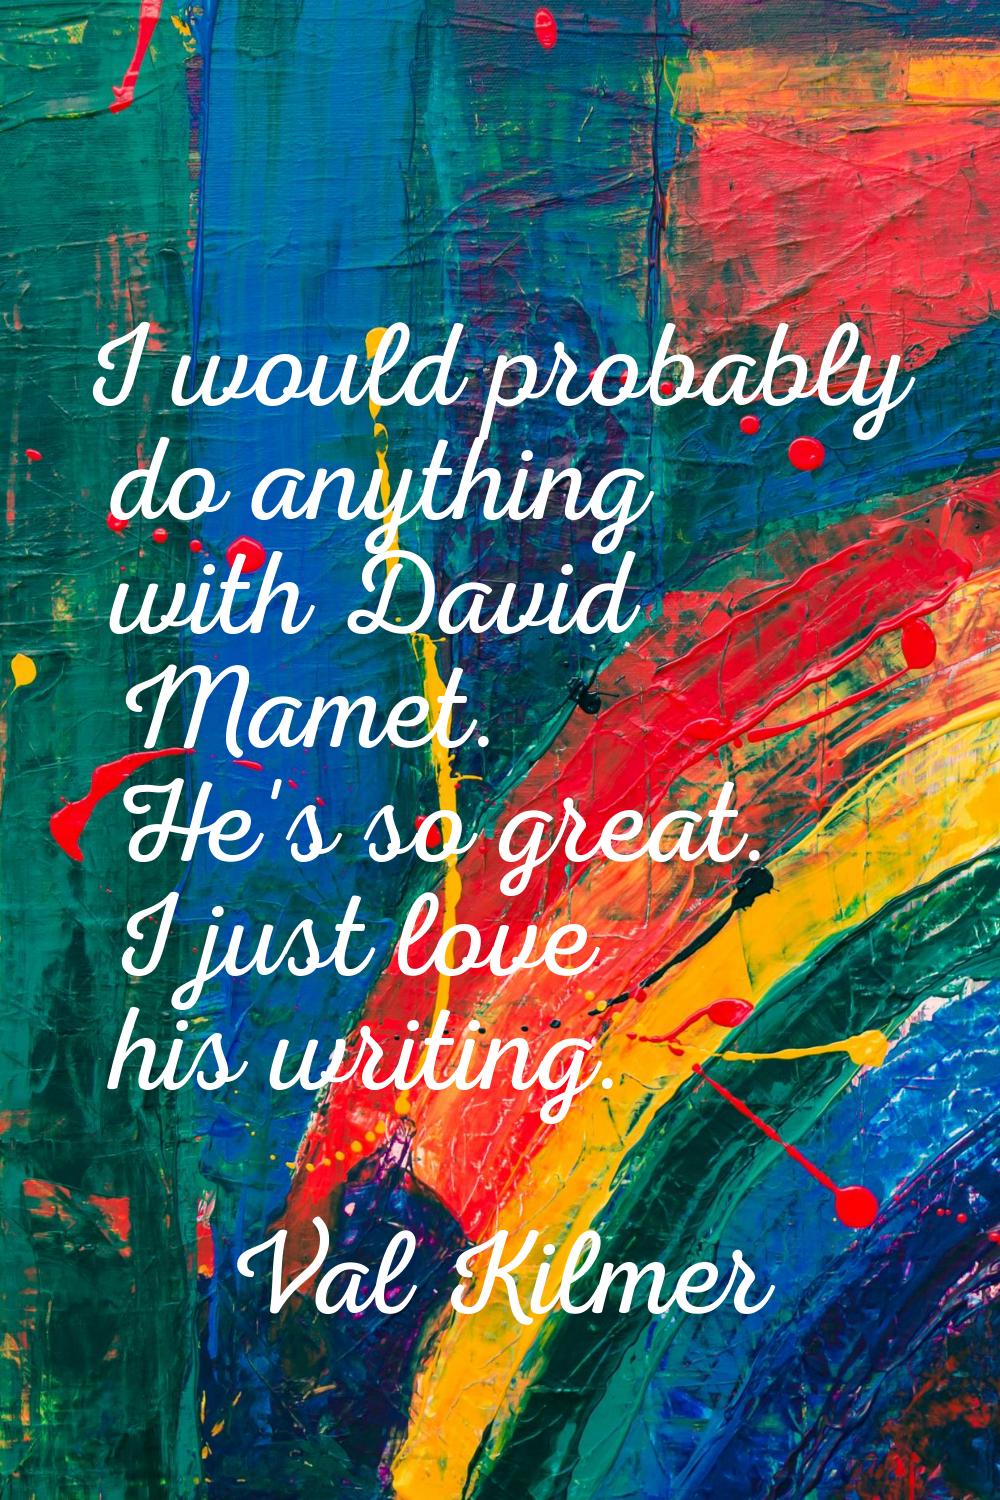 I would probably do anything with David Mamet. He's so great. I just love his writing.